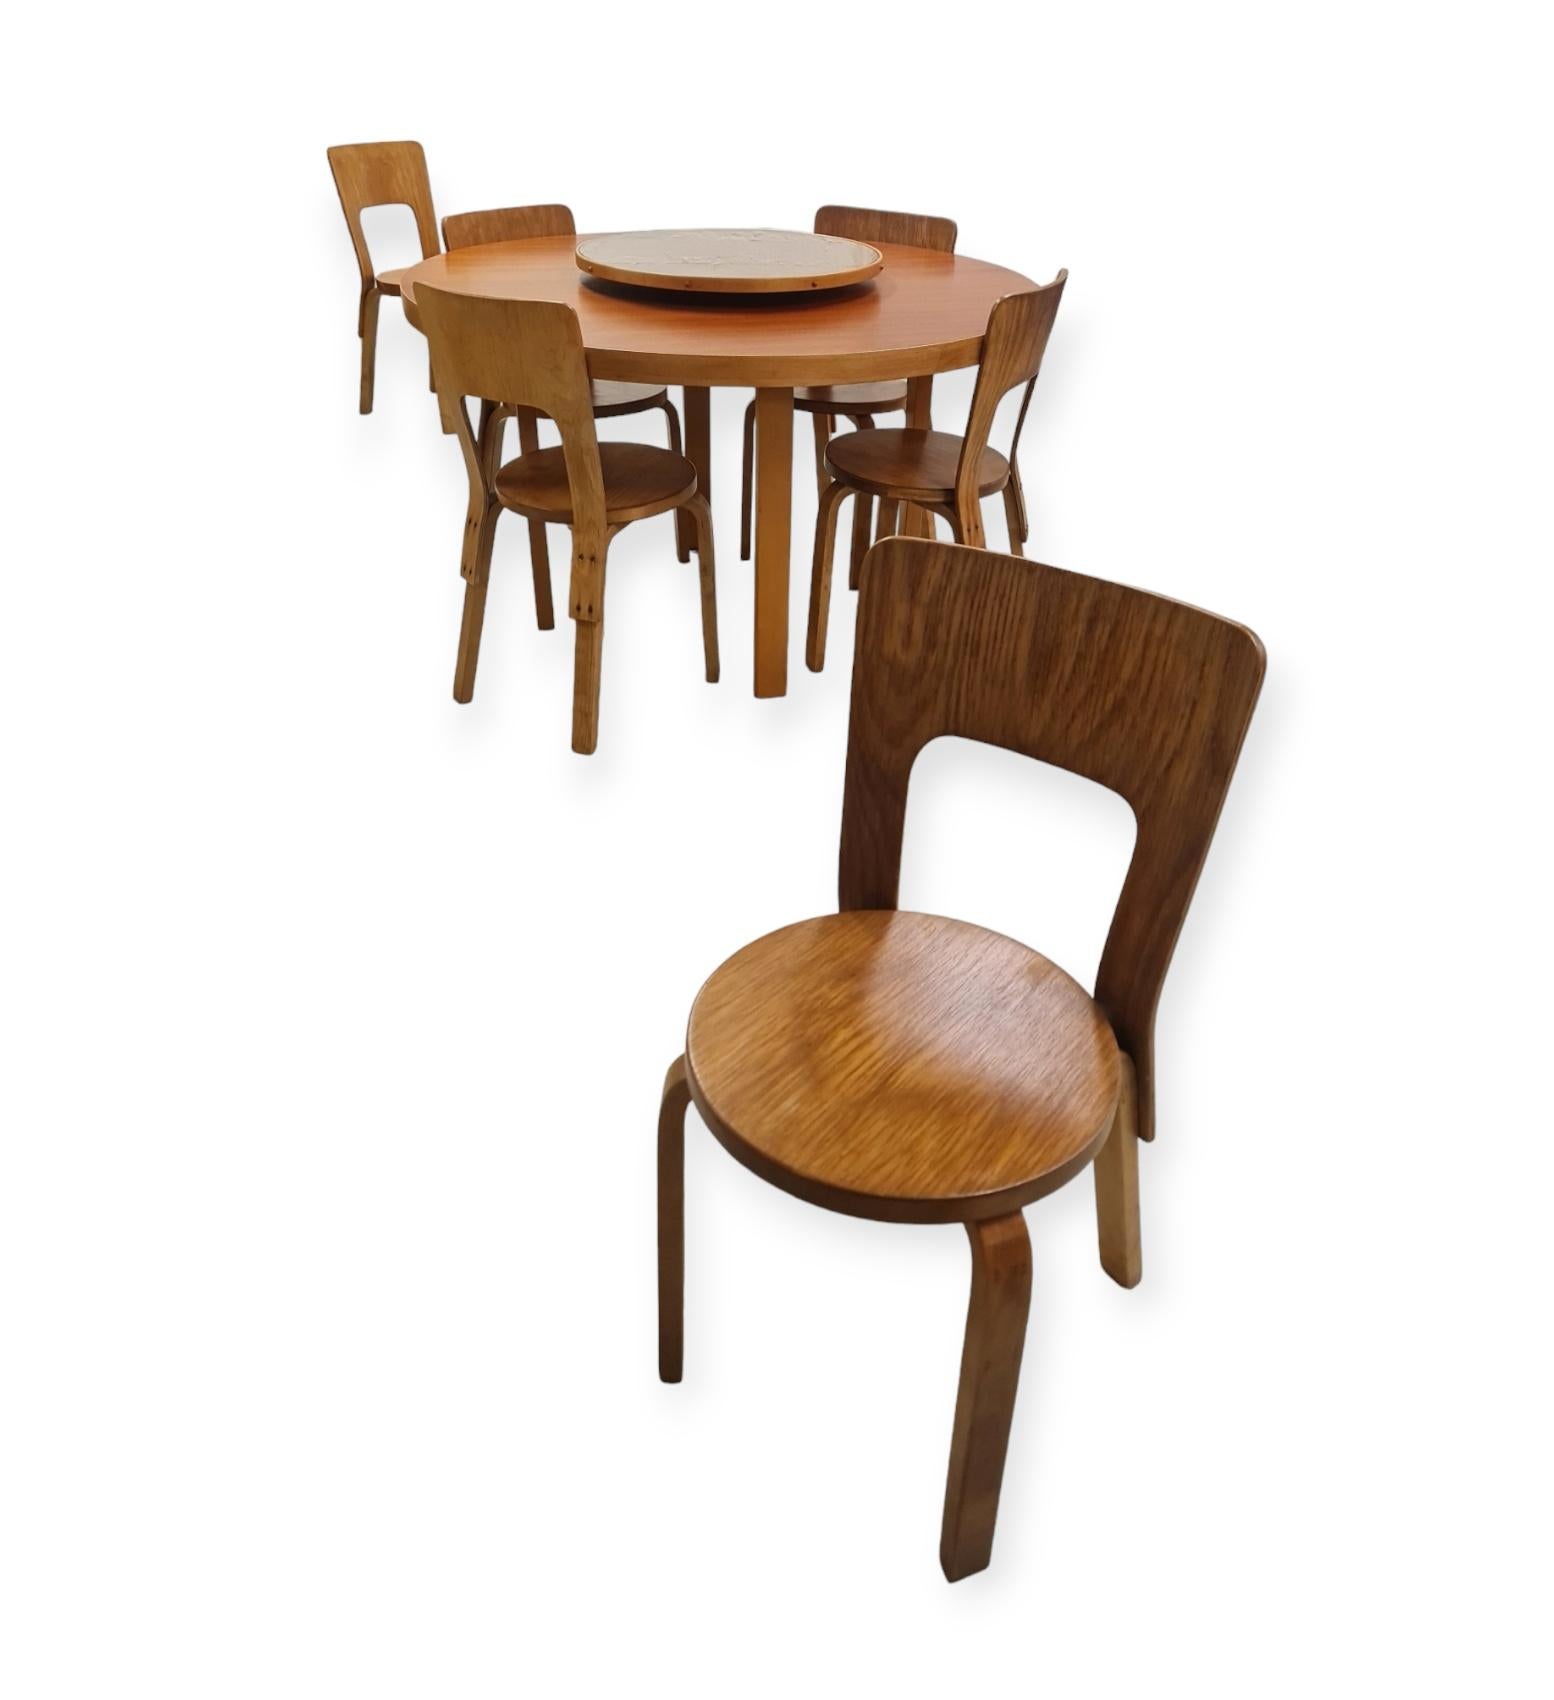 Alvar Aalto Dining Set with Lazy Susan and 6 Model 66 chairs, 1940s For Sale 4